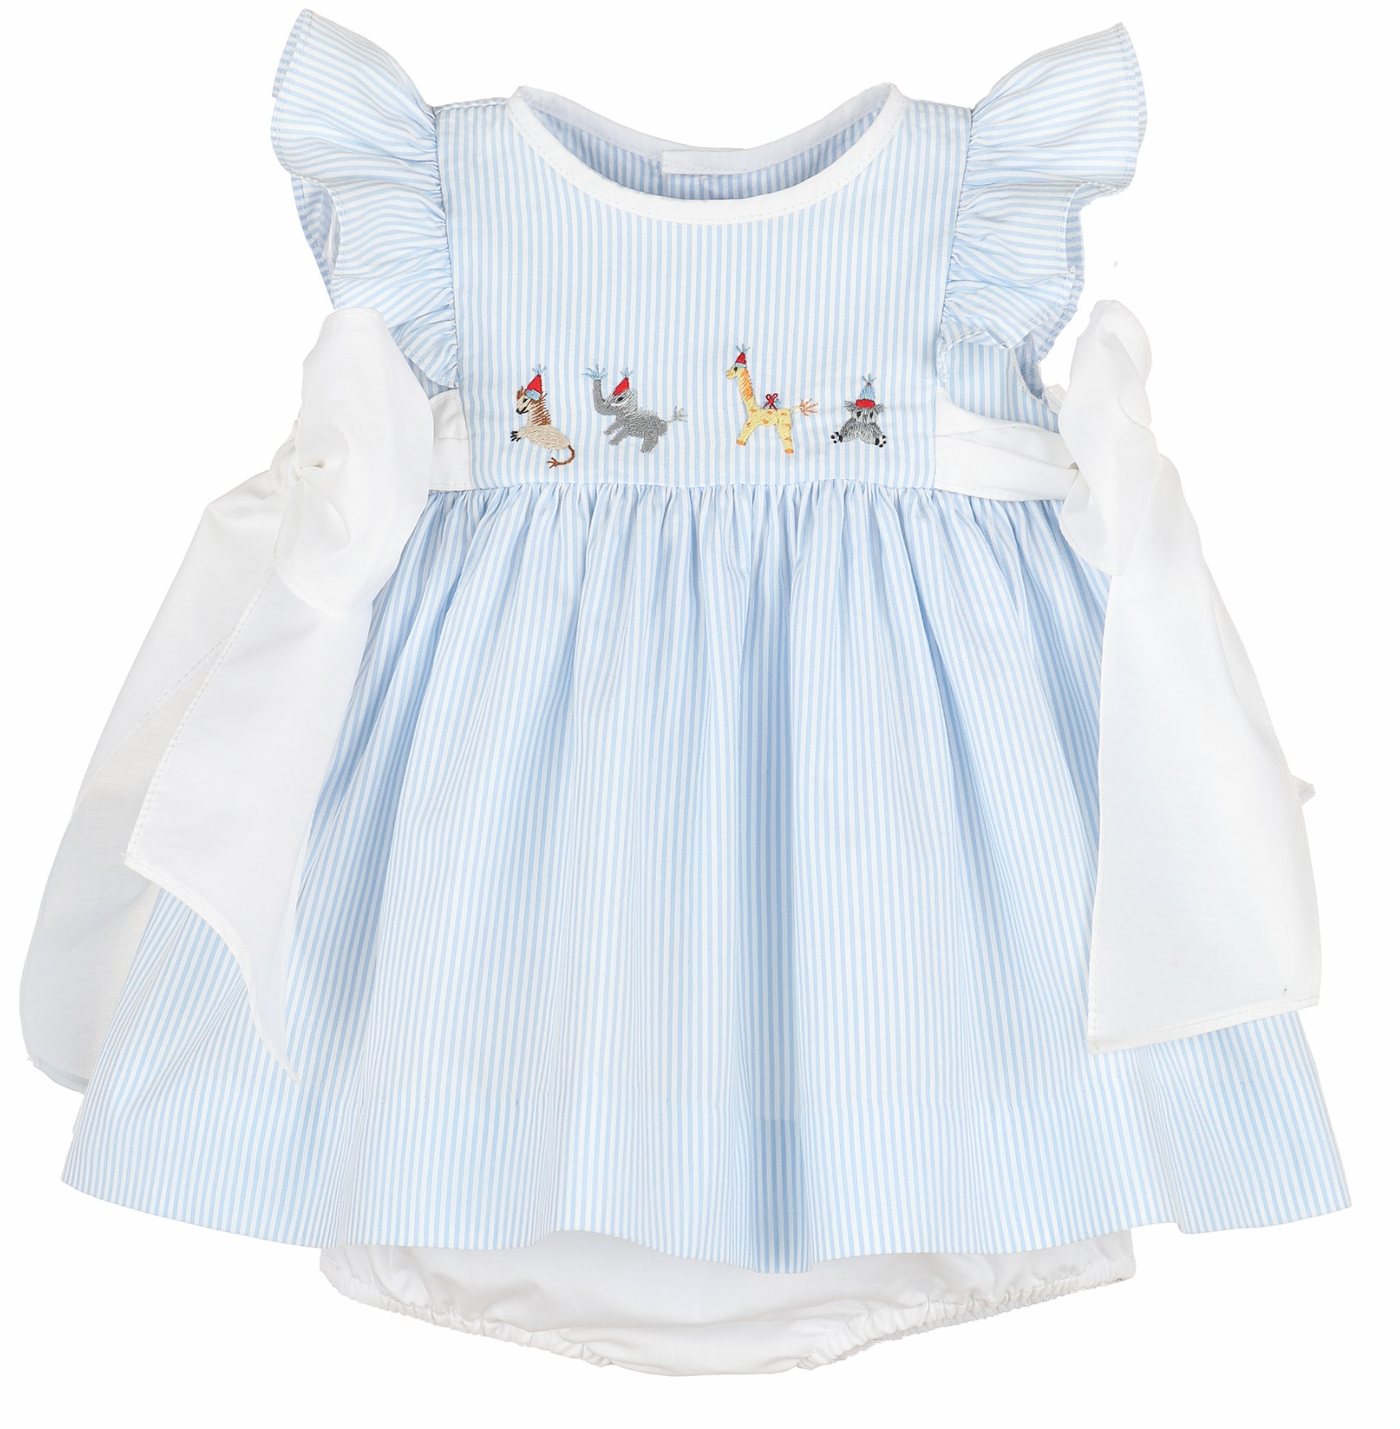 Party Animals Dress w/ Bows-Blue